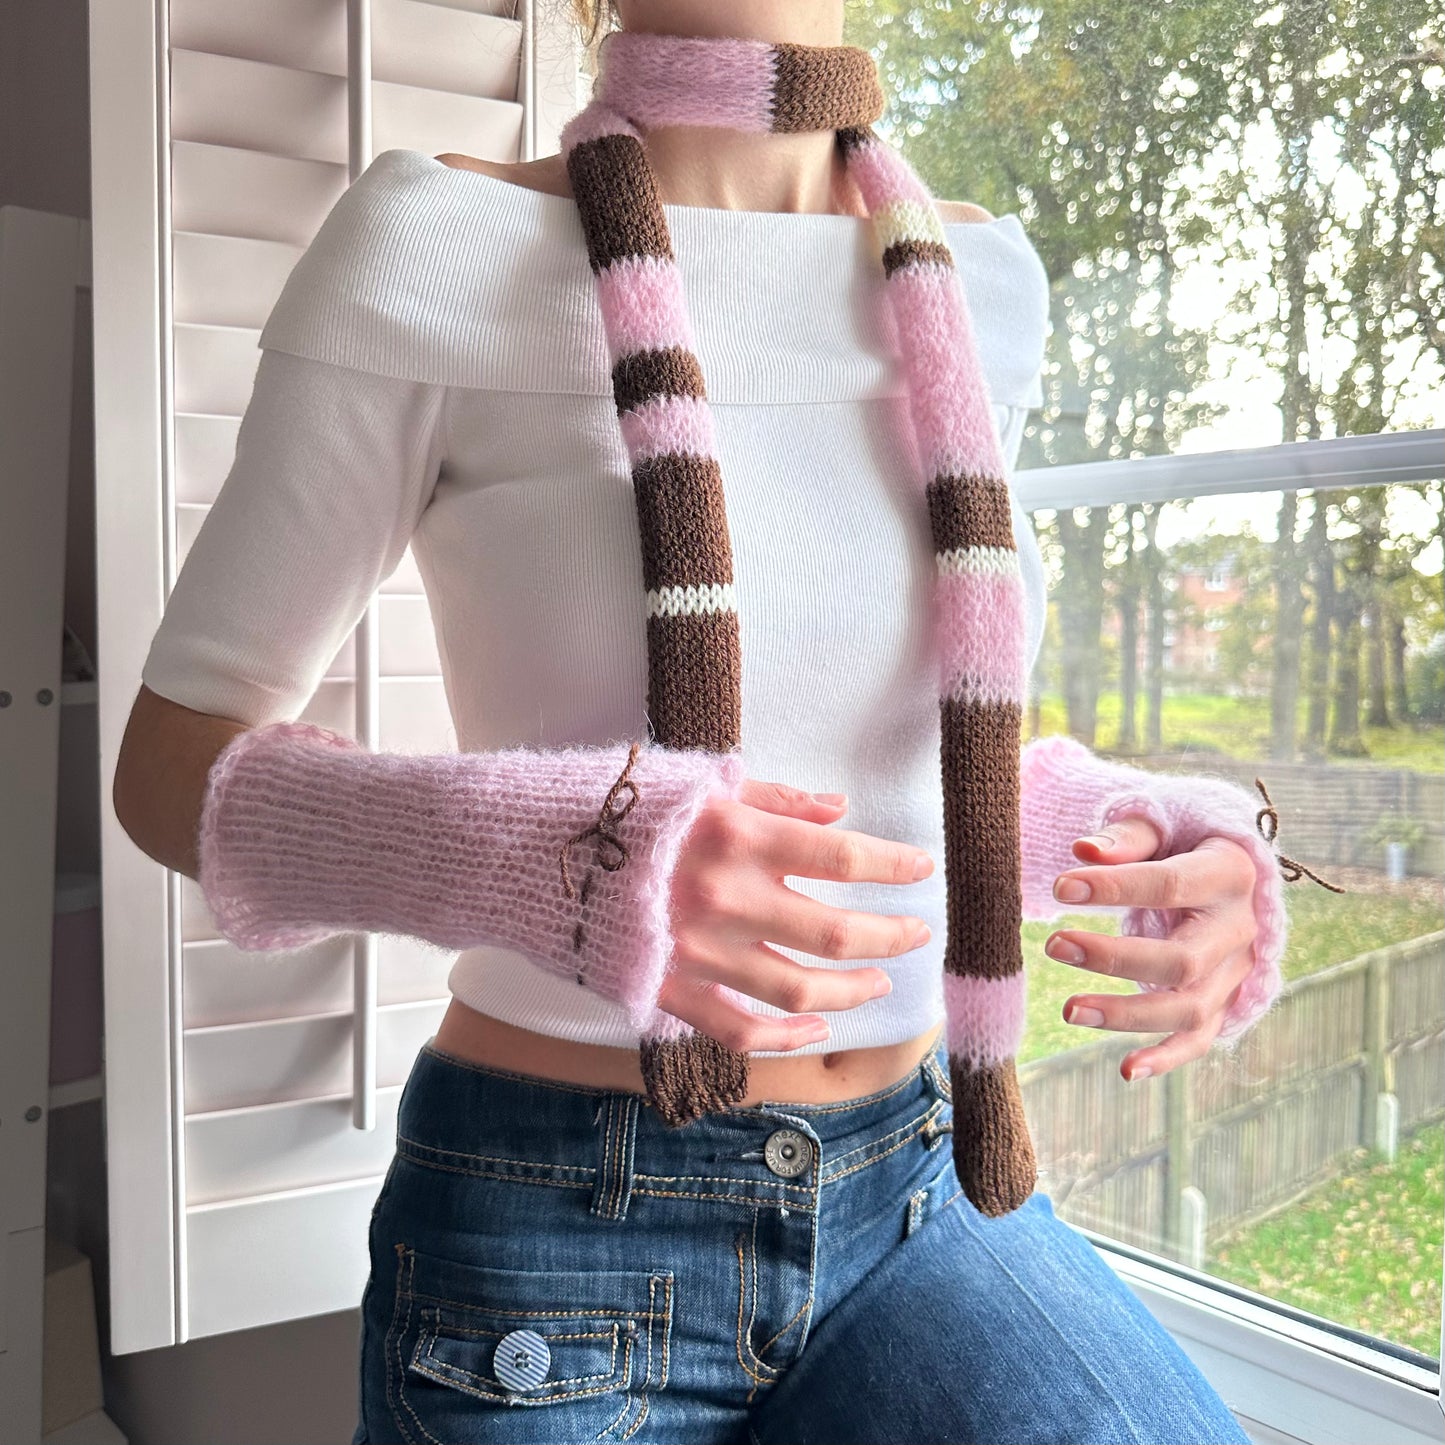 Handmade knitted mohair hand warmers in baby pink & brown - with thumb hole